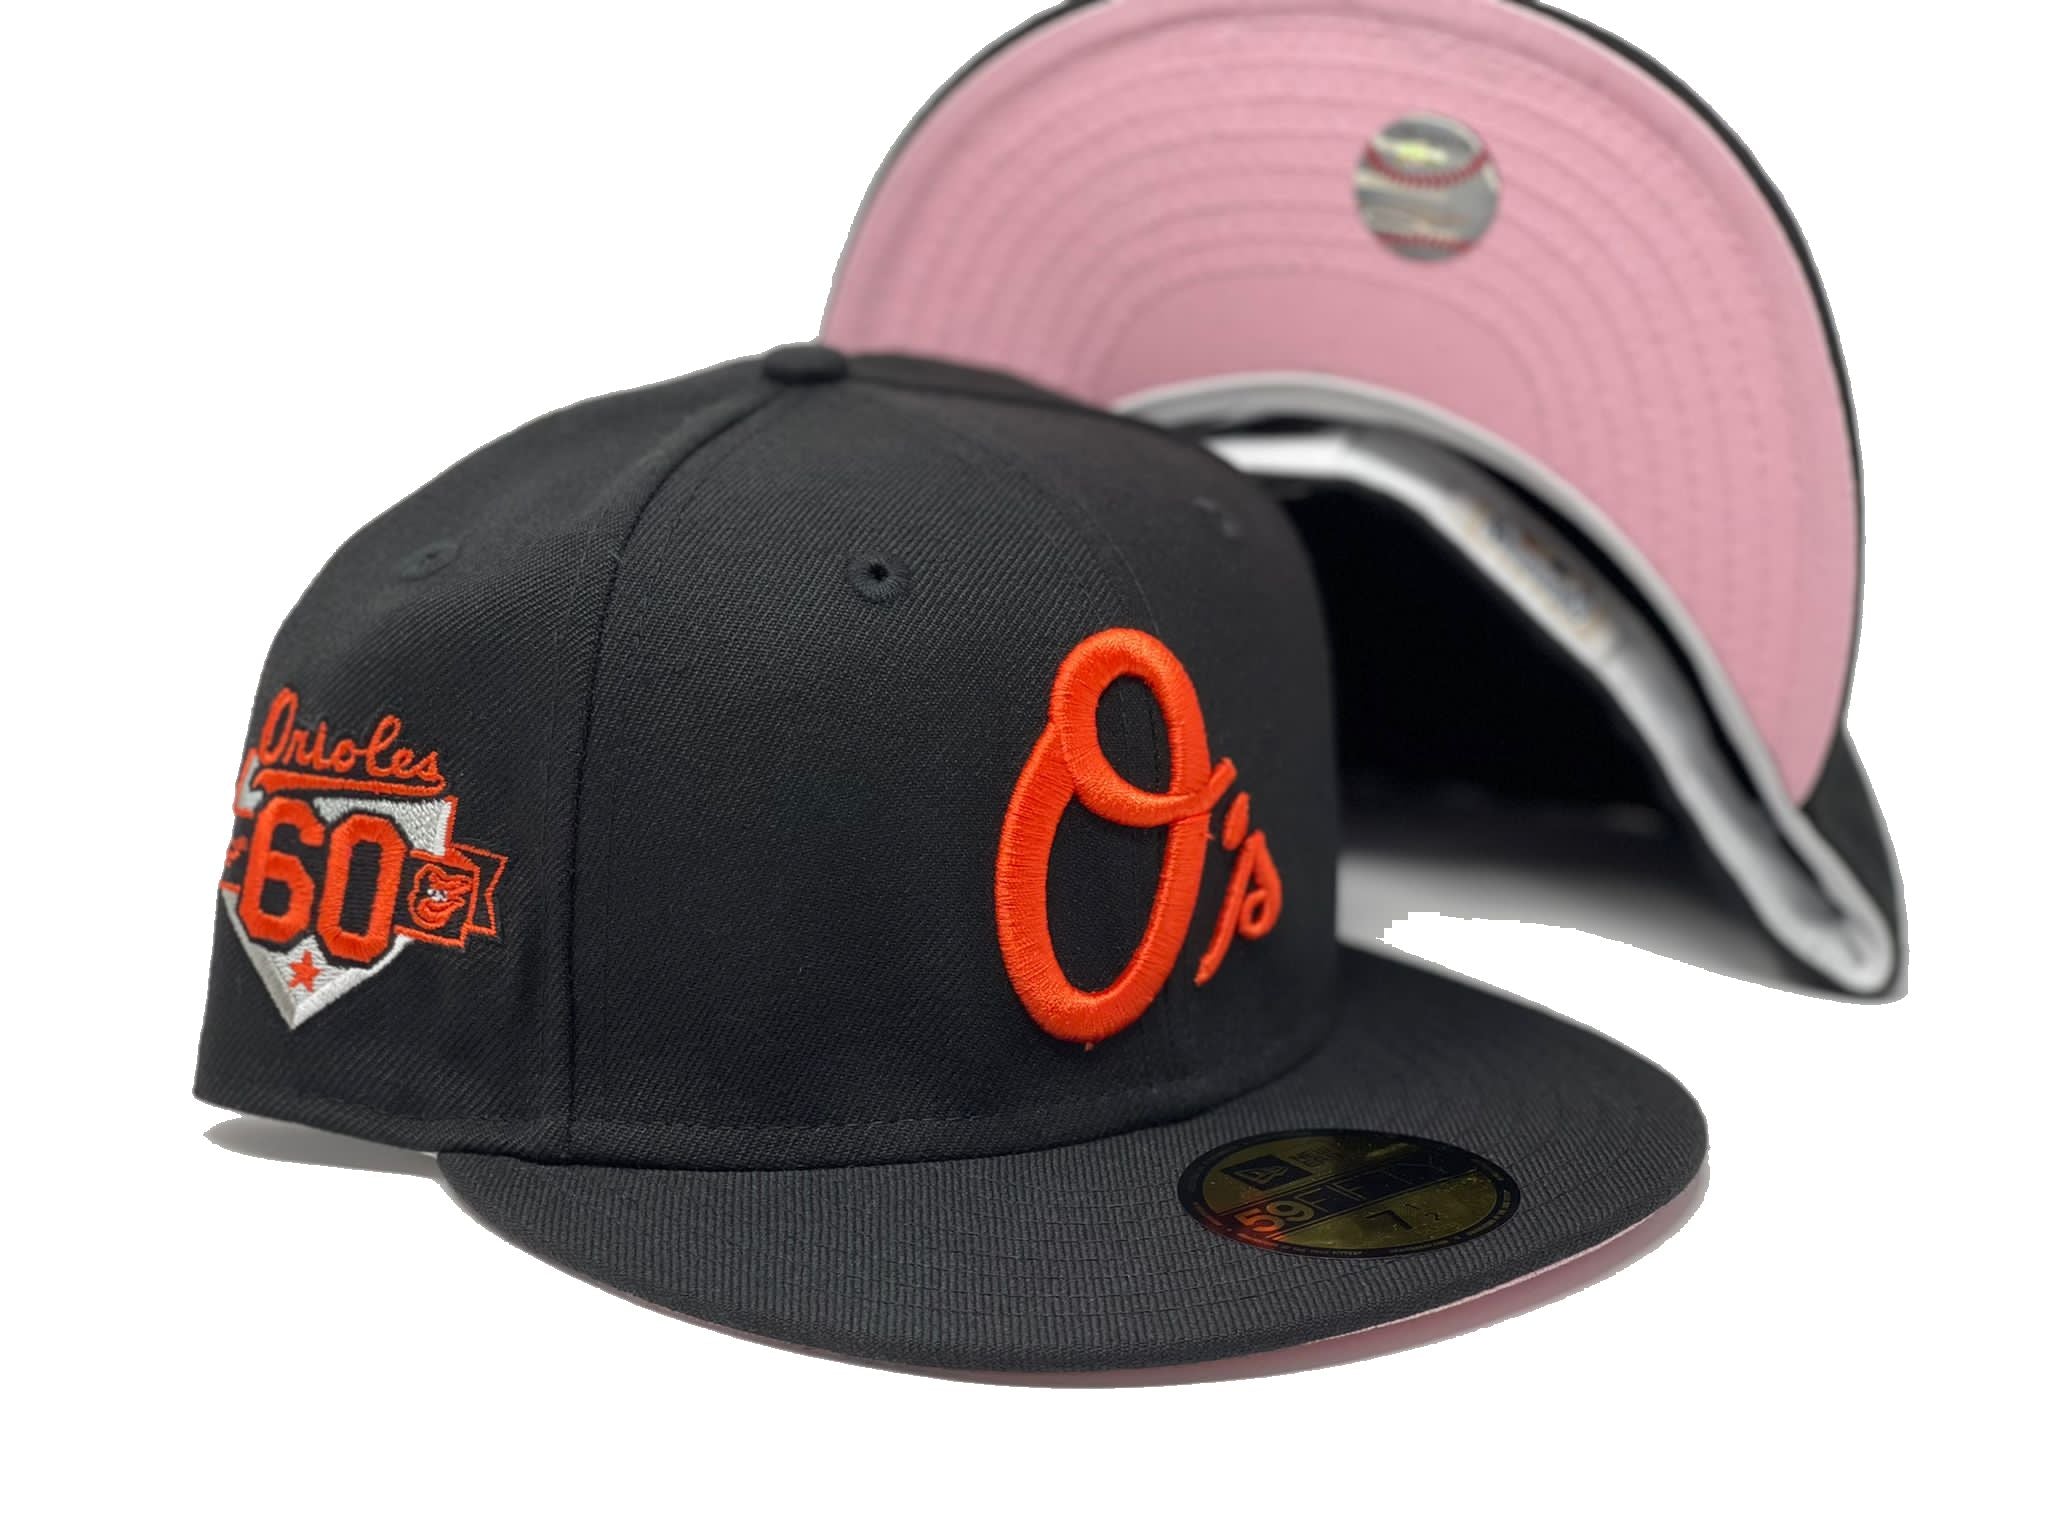 Baltimore Orioles New Era Cream/Black MP6 Custom Side Patch 59FIFTY Fitted Hat, 7 / Cream/Black